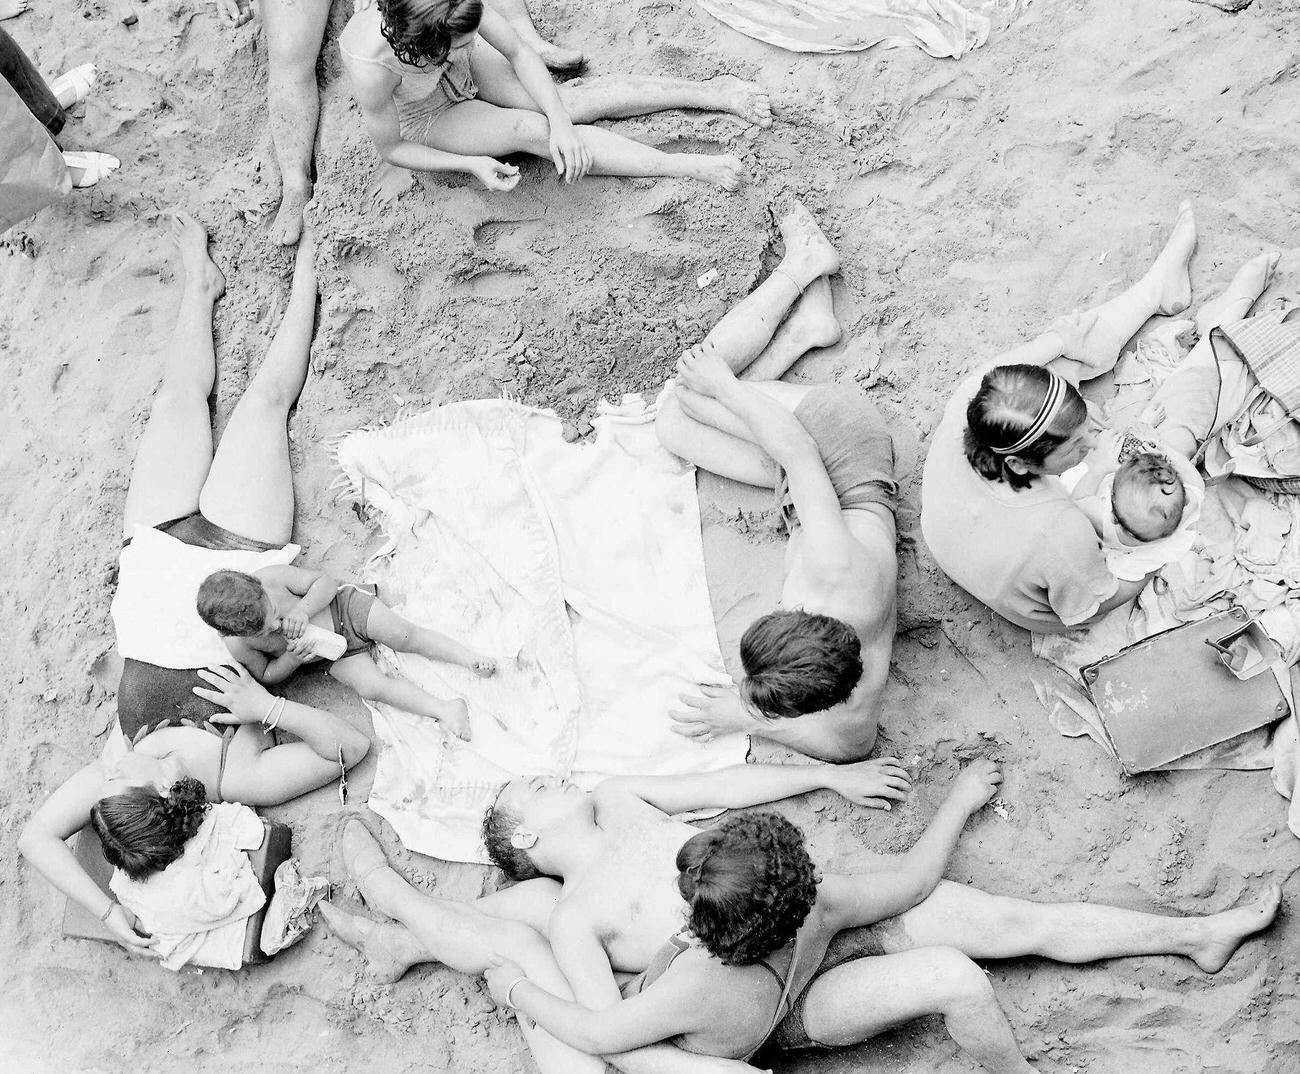 Sunbathers Find Space On Coney Island, August 1